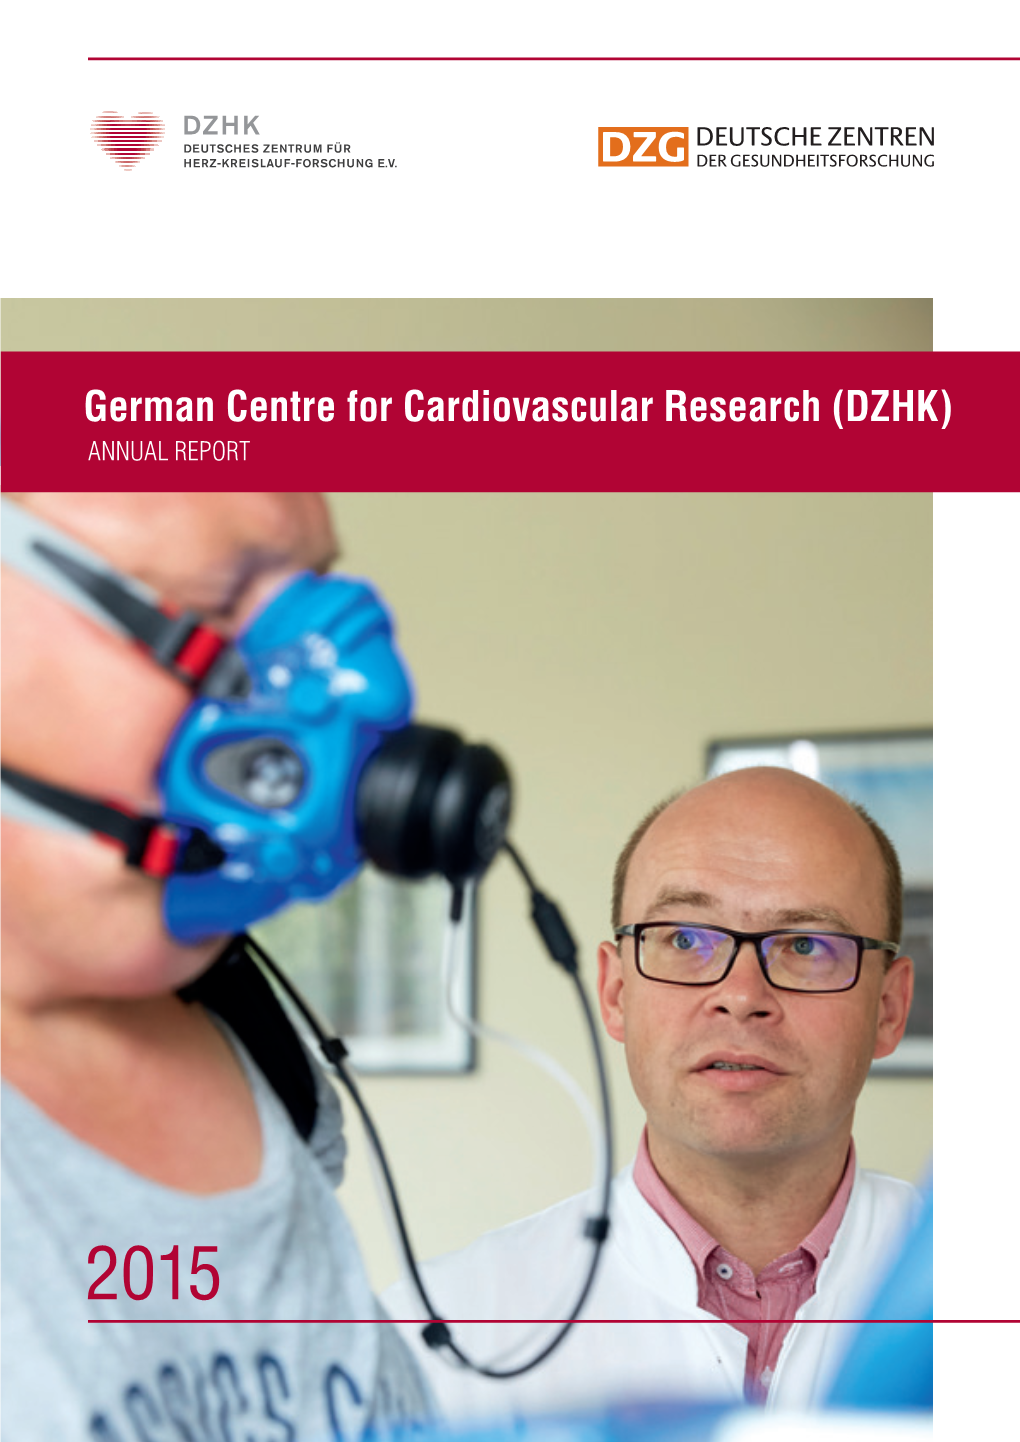 German Centre for Cardiovascular Research (DZHK) ANNUAL REPORT